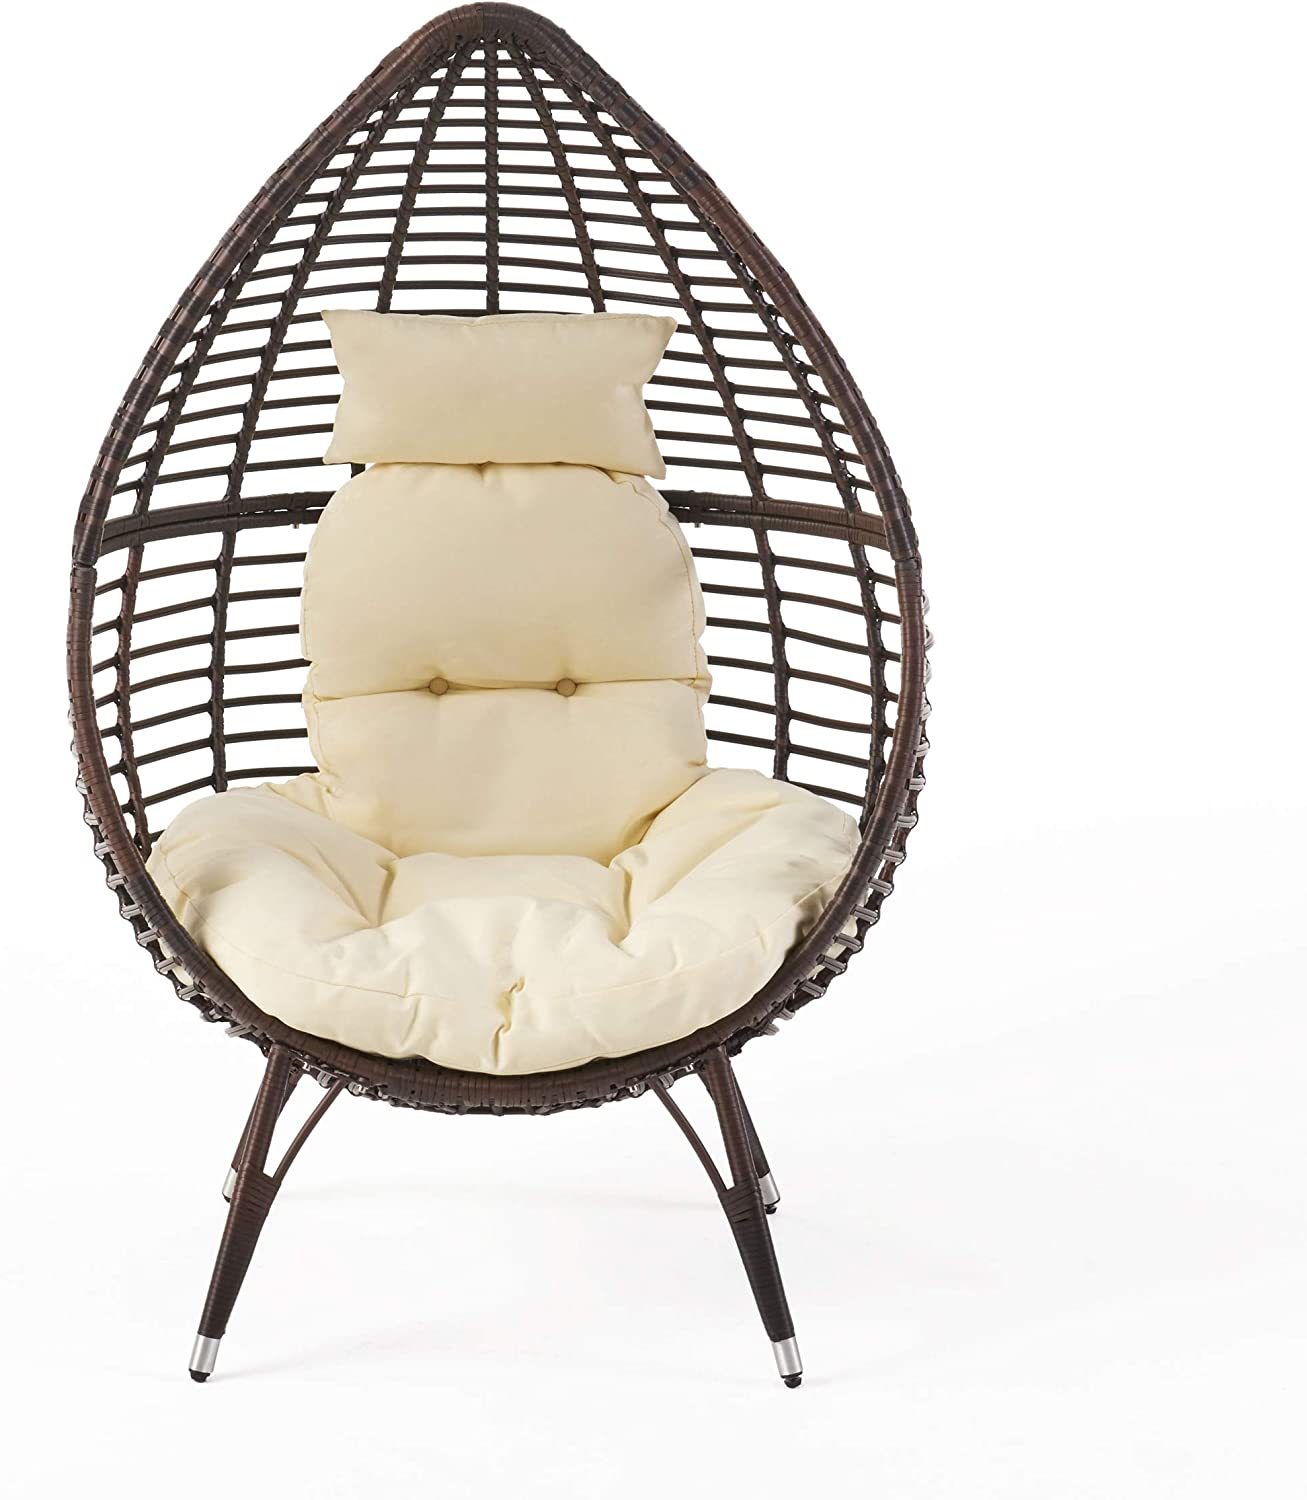 Christopher Knight Home Cutter Teardrop Wicker Lounge Chair with, Multibrown - $210.99